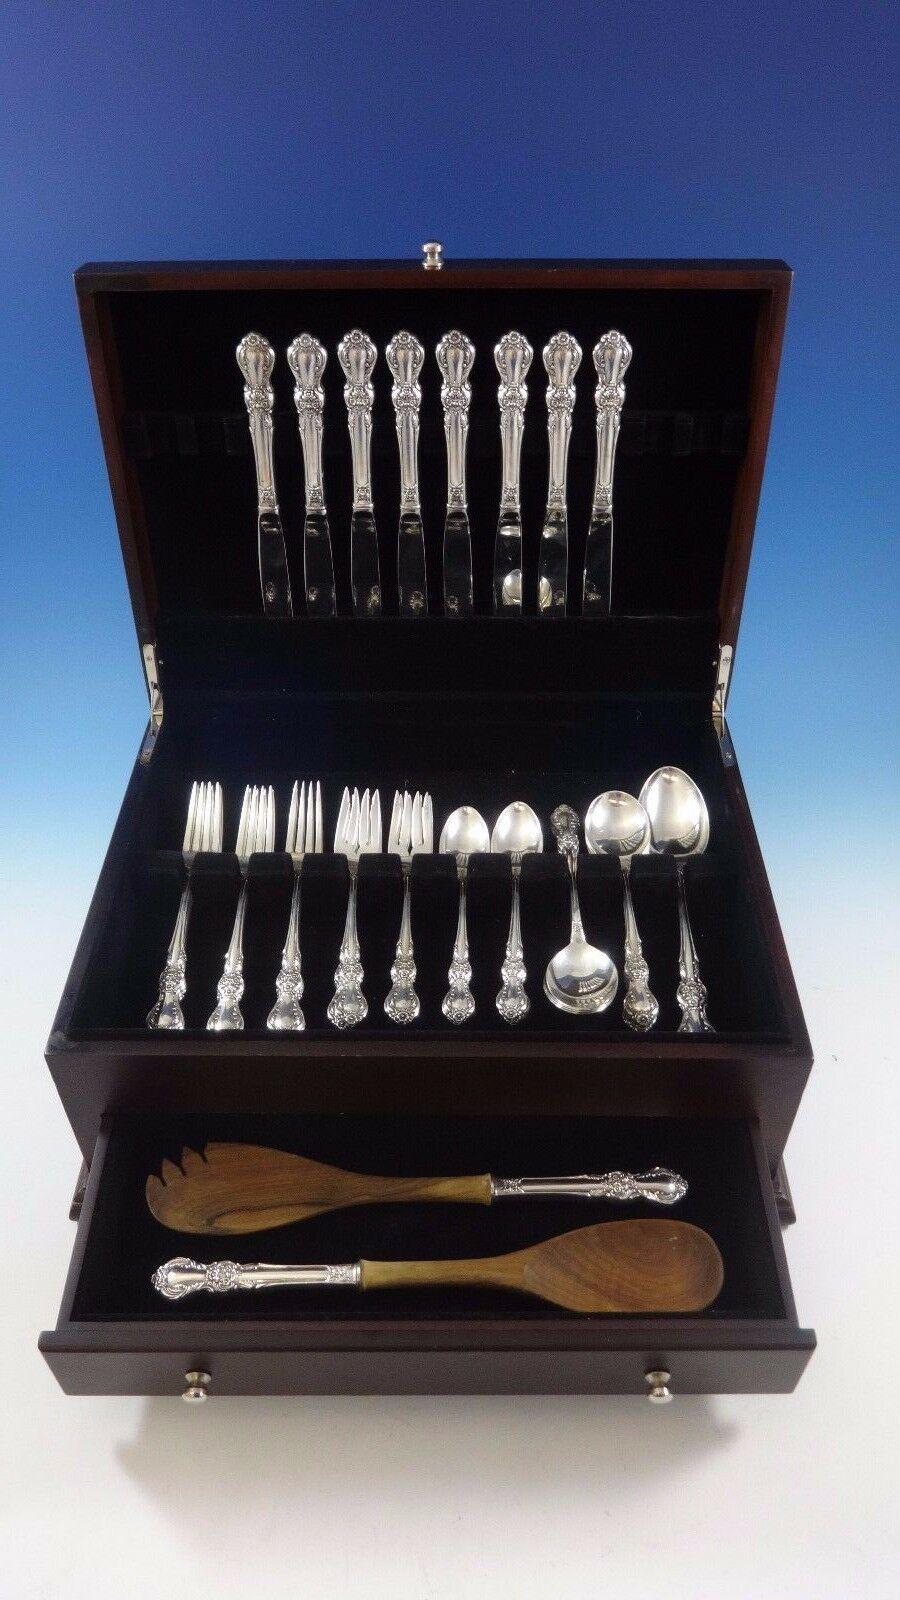 Beautiful Southern treasure by international sterling silver flatware set - 43 pieces. This set includes:

8 knives, 9 1/4